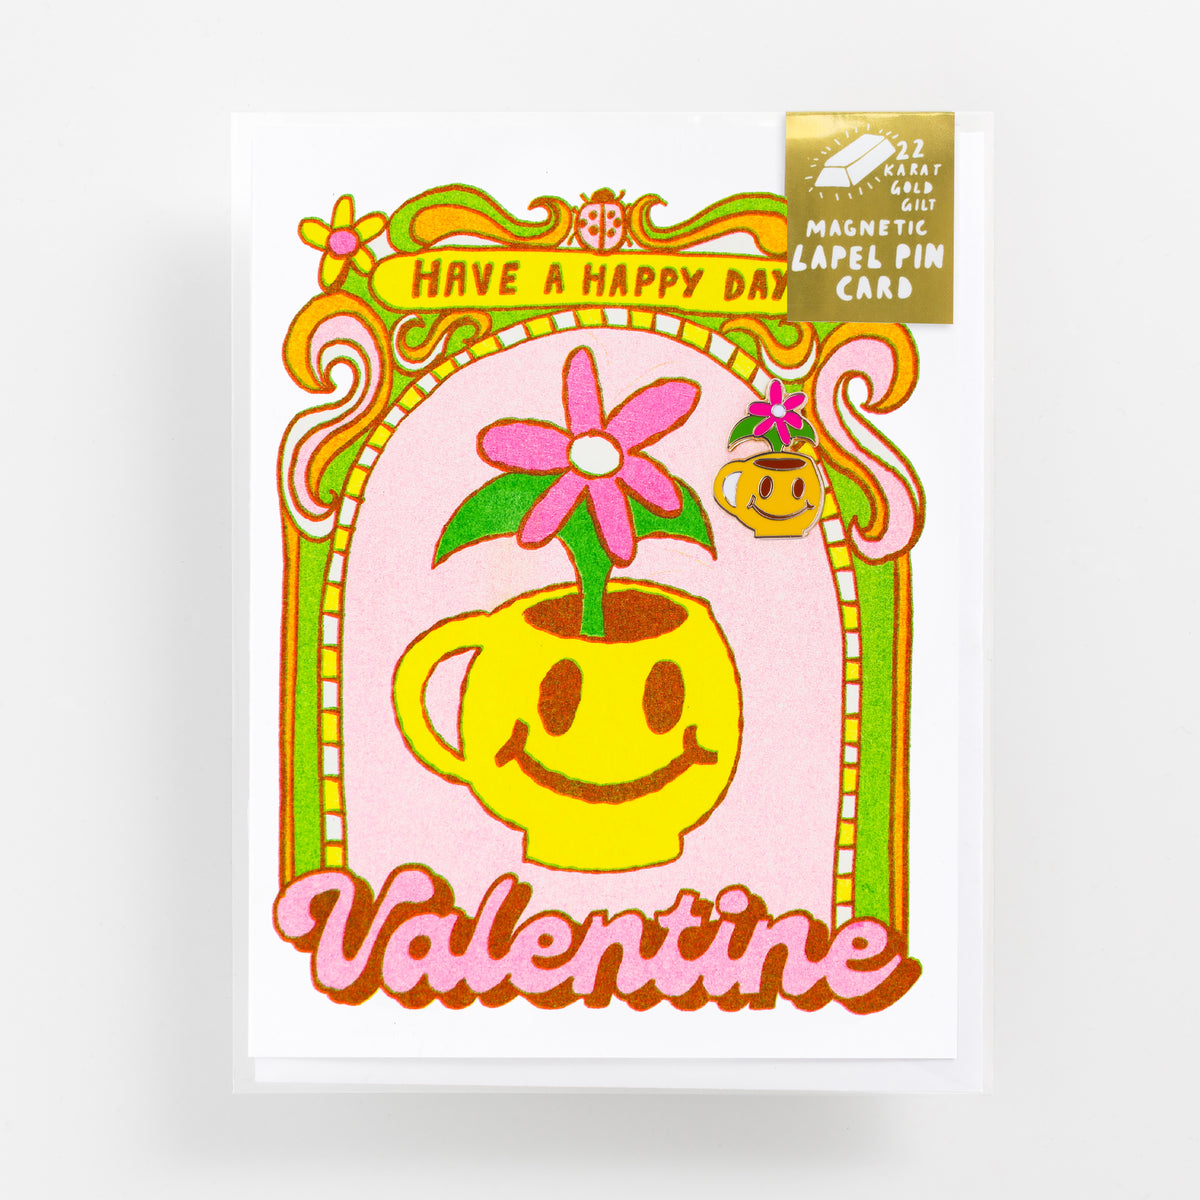 Have a Happy Valentine Smiley Face - Lapel Pin Card